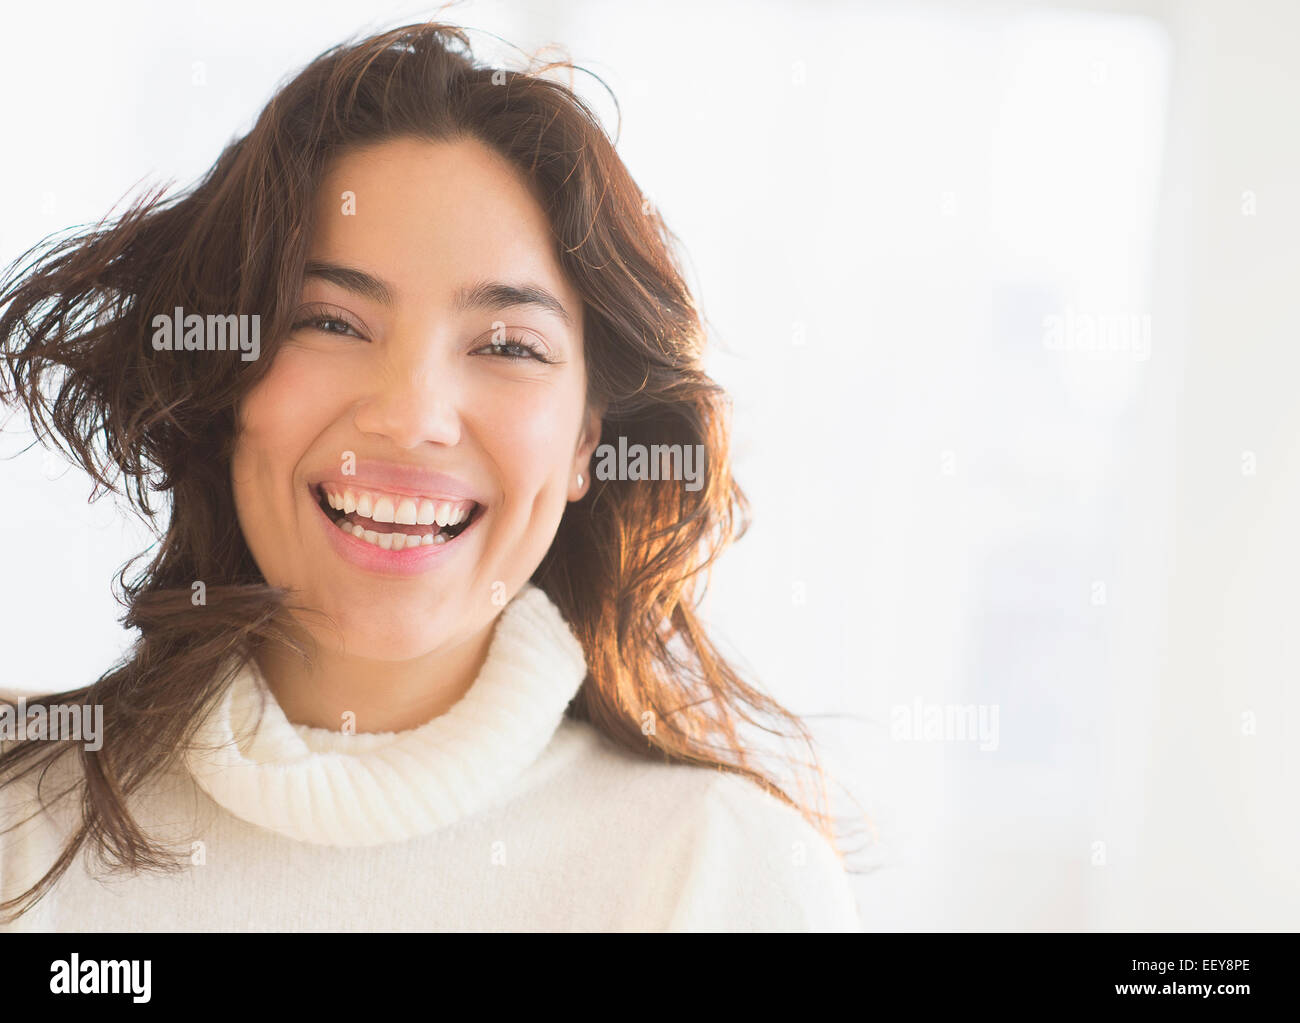 Portrait of young woman laughing Stock Photo - Alamy